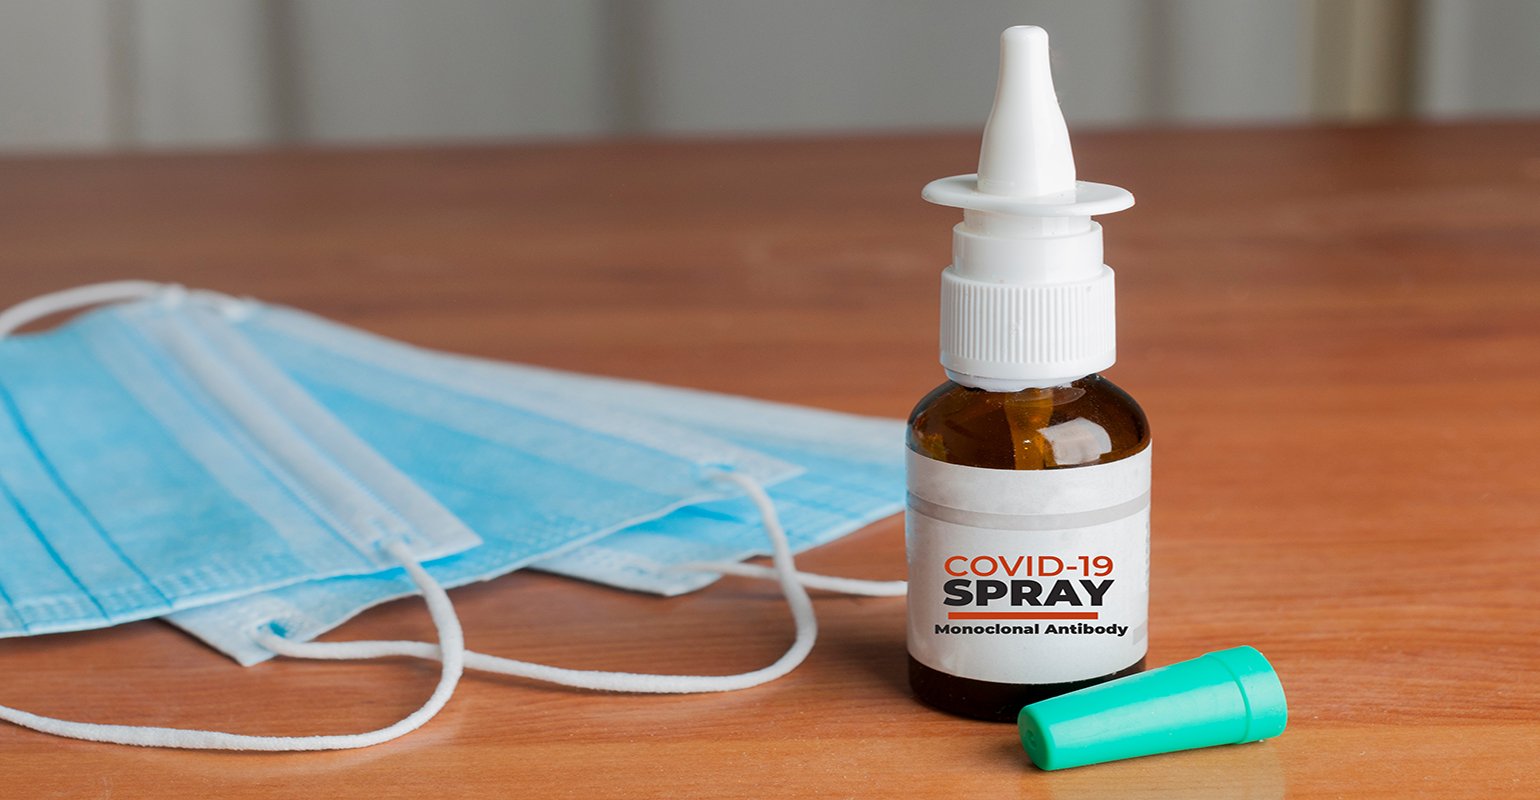 nasal sprays help combat COVID-19? | Omnia Health Insights | News from the global healthcare community